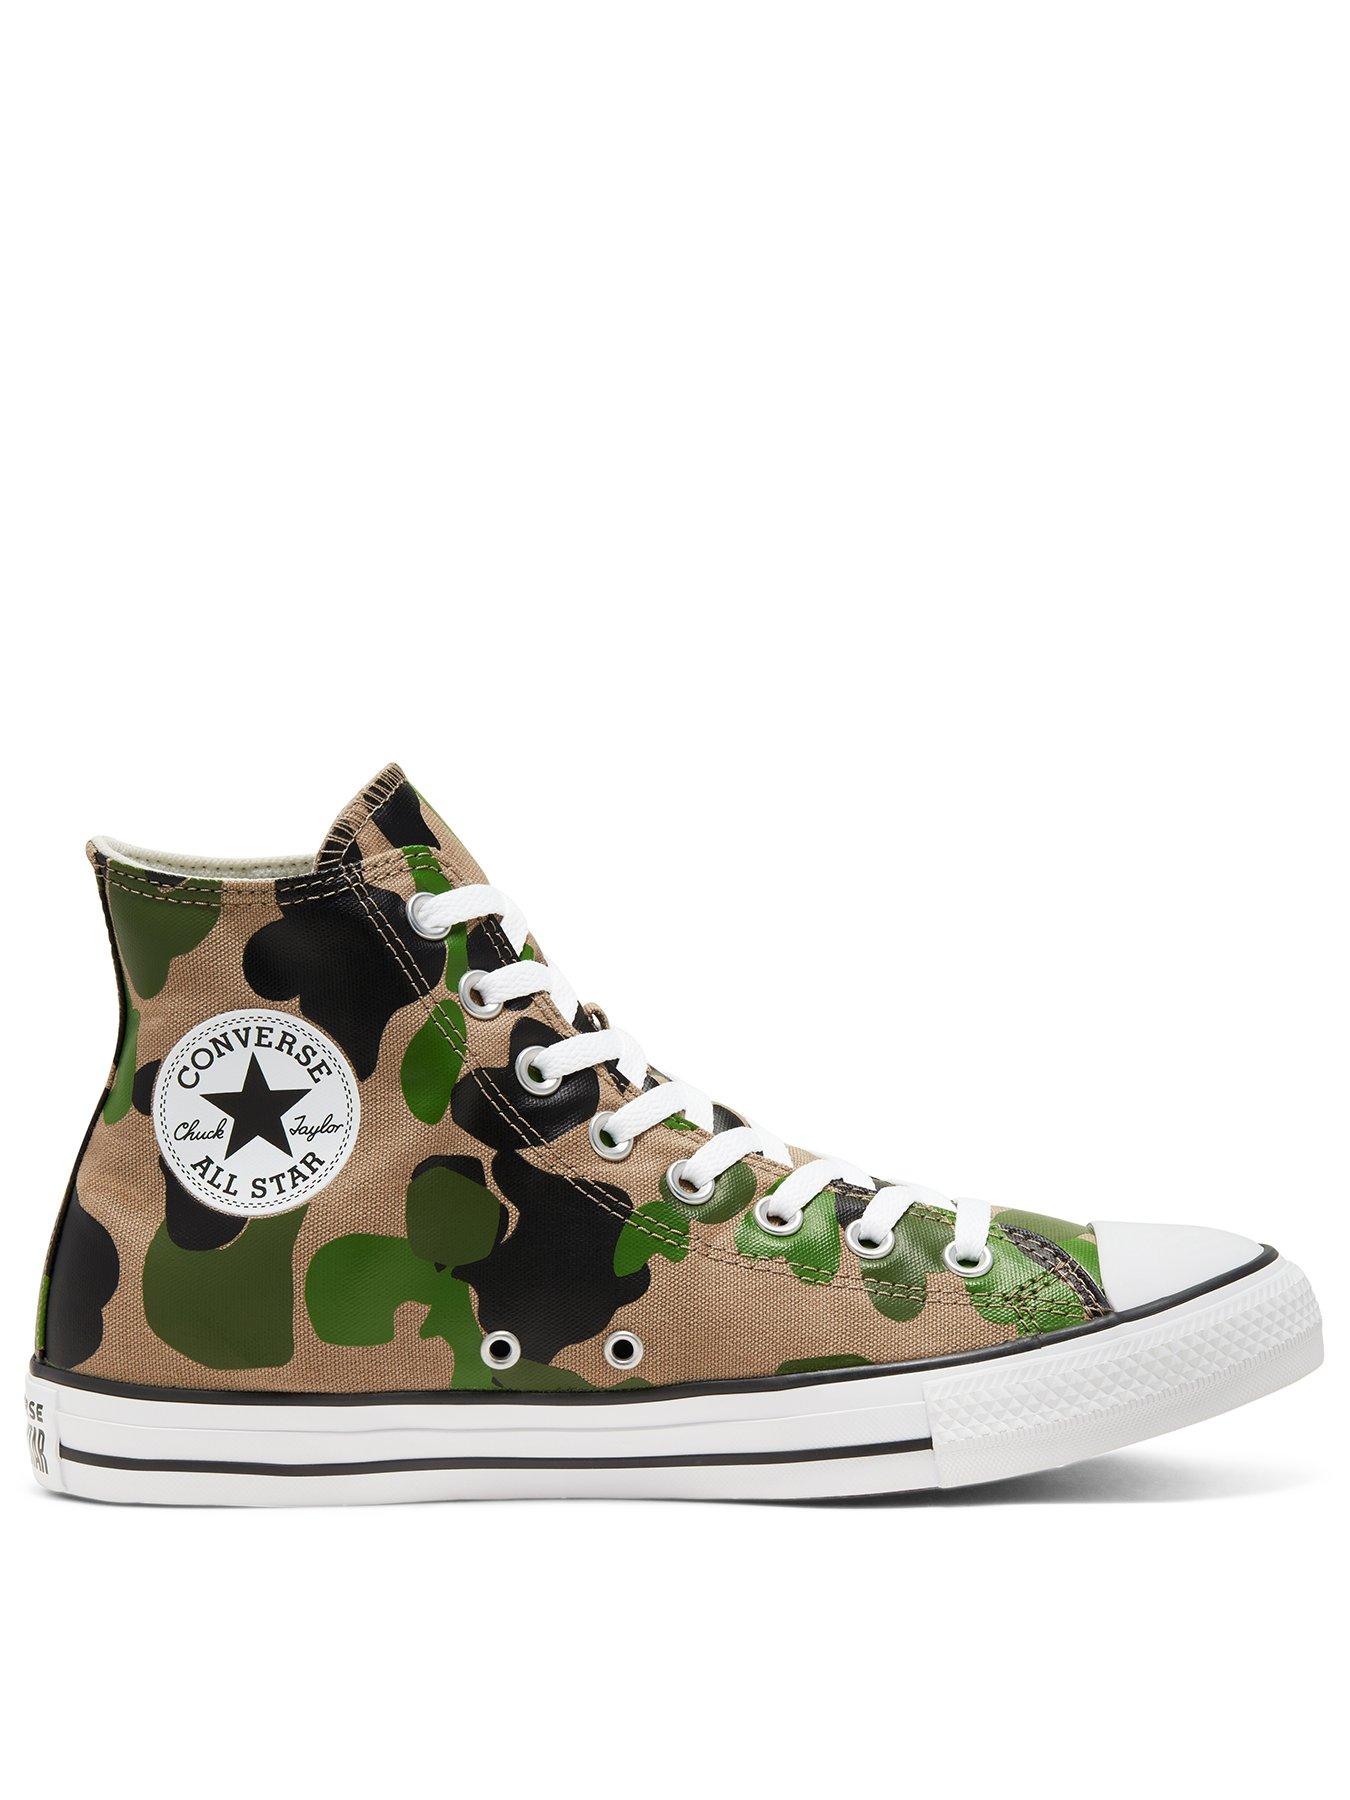 converse camo all star low tops